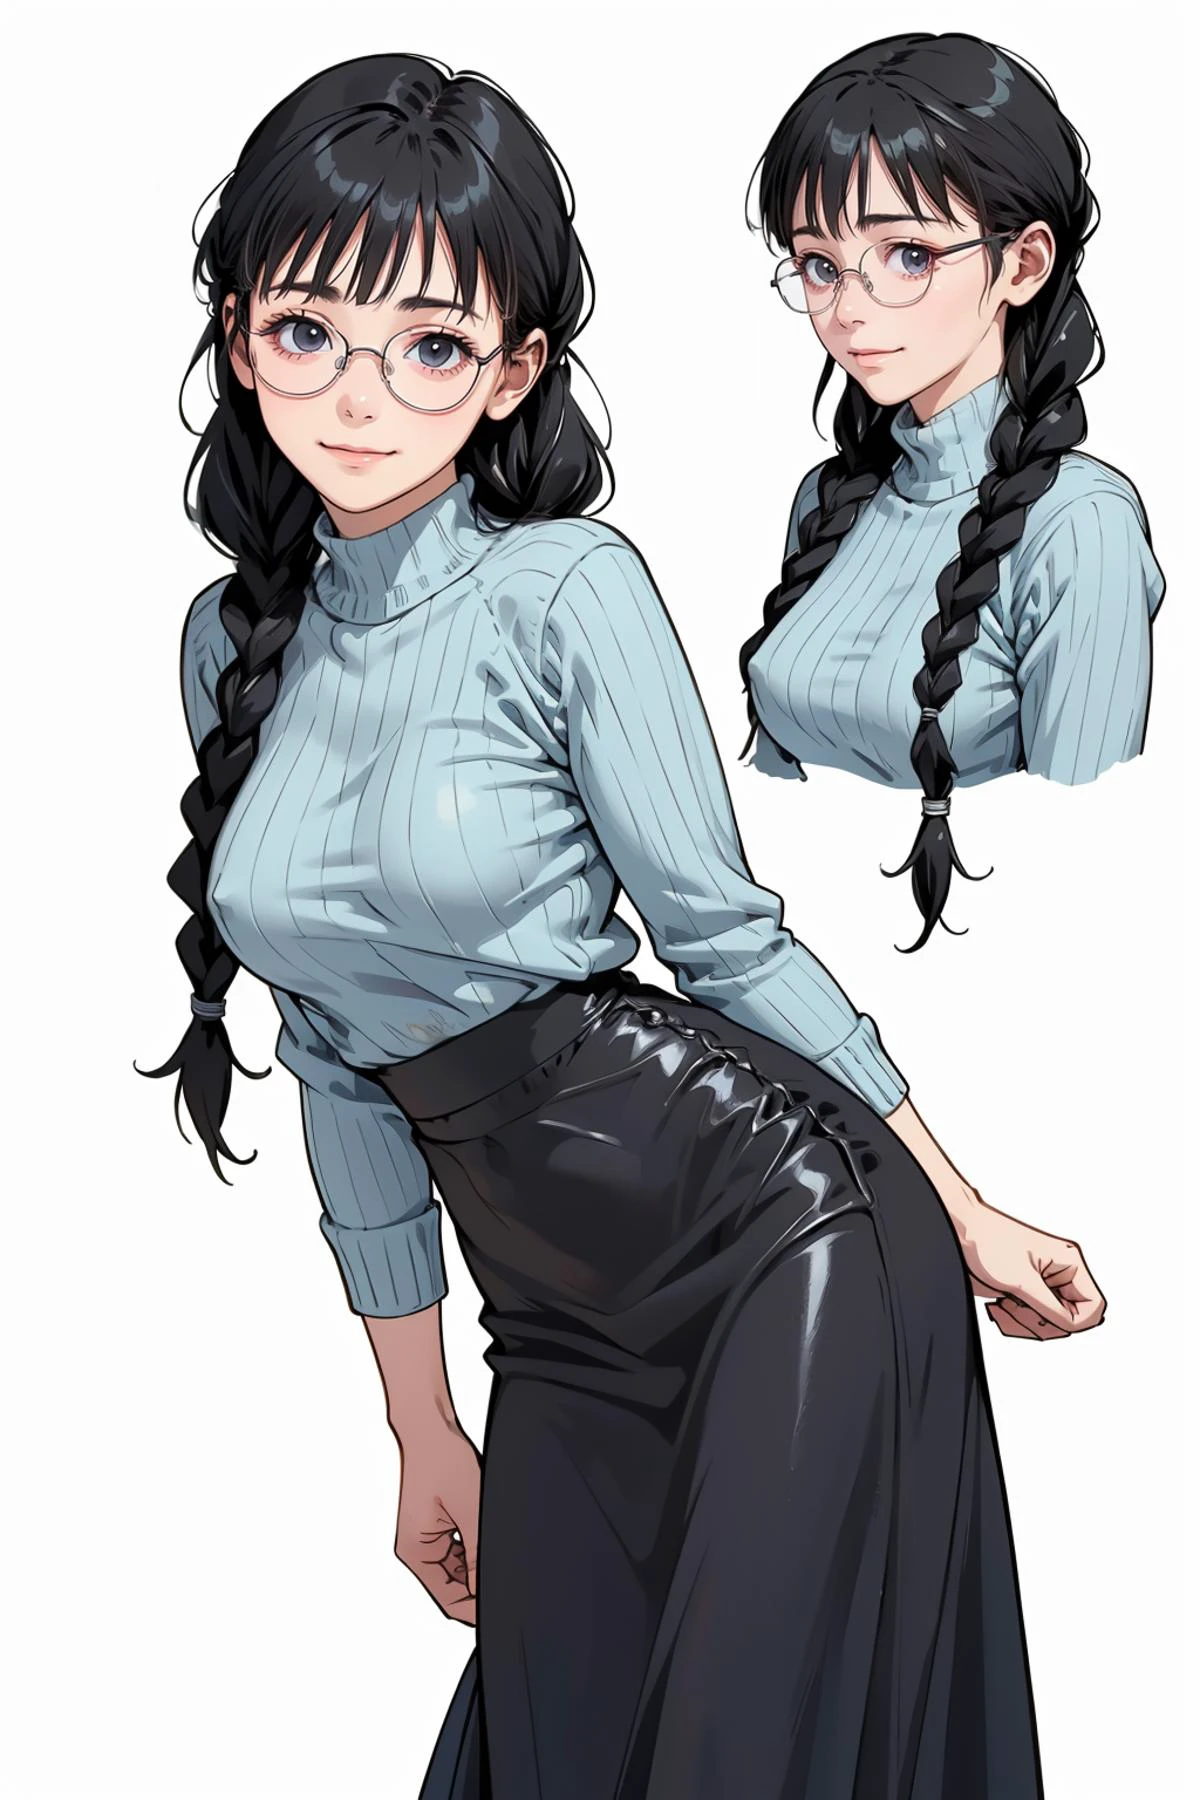 8k high quality detailed,highres,comic,anime,detailed image,
(an illustration of a teenage girl posing,magazine_sheet, (an illustration of girl,teenage girl)),(magazine_illustration),(multiple view manuscript),
(, megumi,black hair, glasses, twin braids,black_eyes,medium_breasts),(Melancholy Smile),((Walking with an umbrella in the rain, looking determined and resilient,):0.5),detailed_face,realistic_skin_texture,(outfit-gls,sweater,high-waist skirt,long skirt,[[from behind]]),
realistic clothing texture,